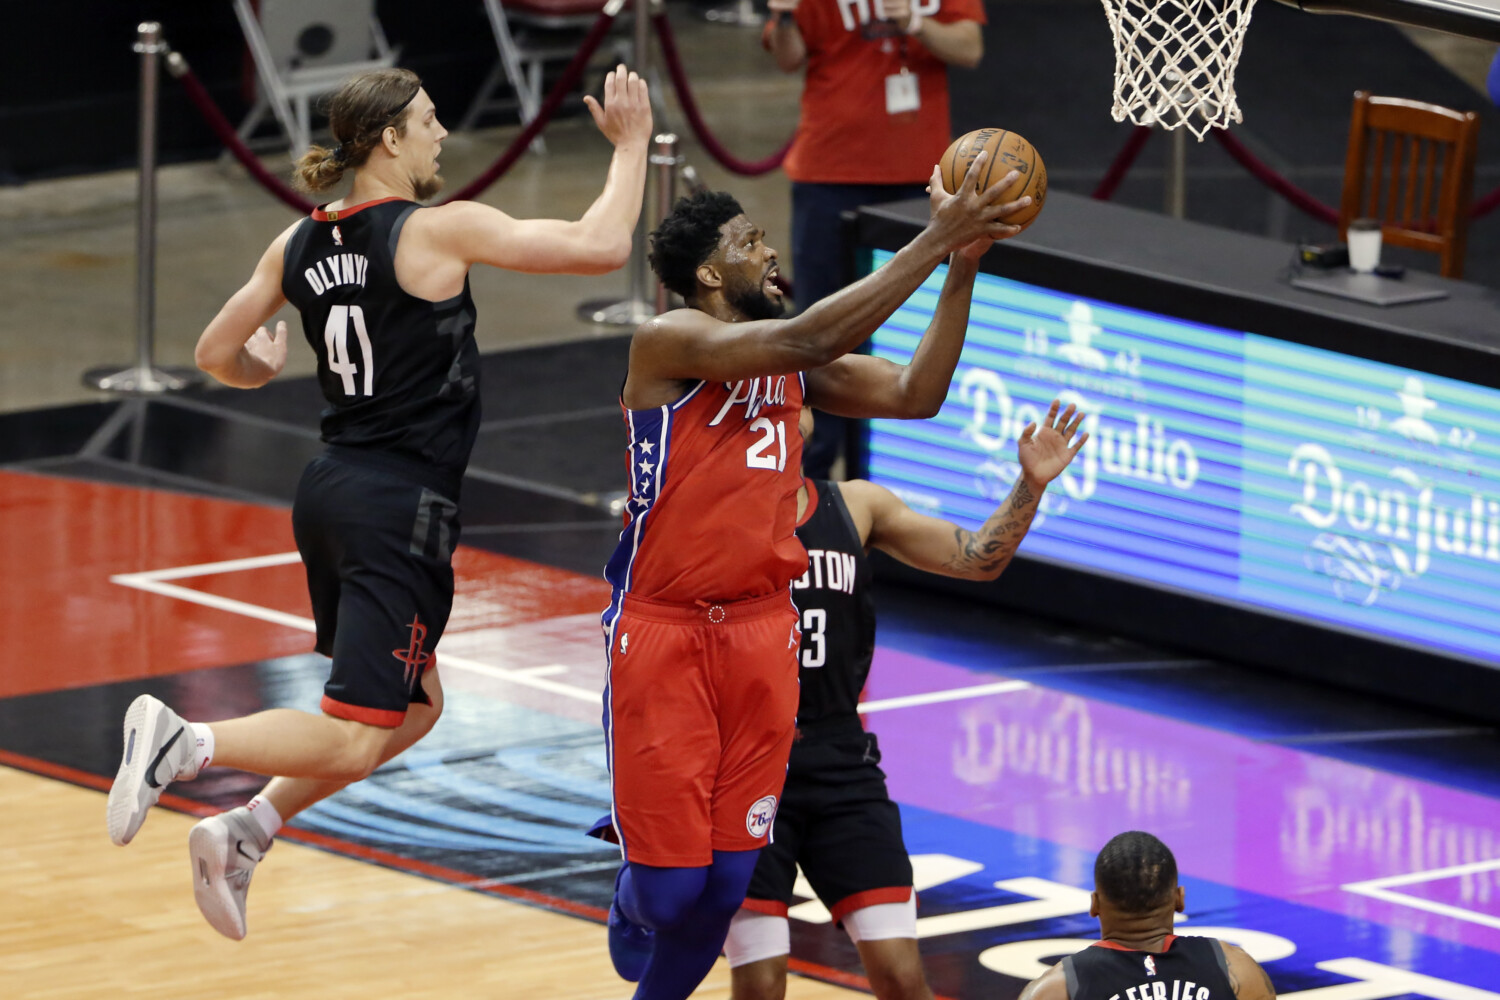 NBA roundup: Embiid scores 34 points in 3 quarters as 76ers beat Rockets